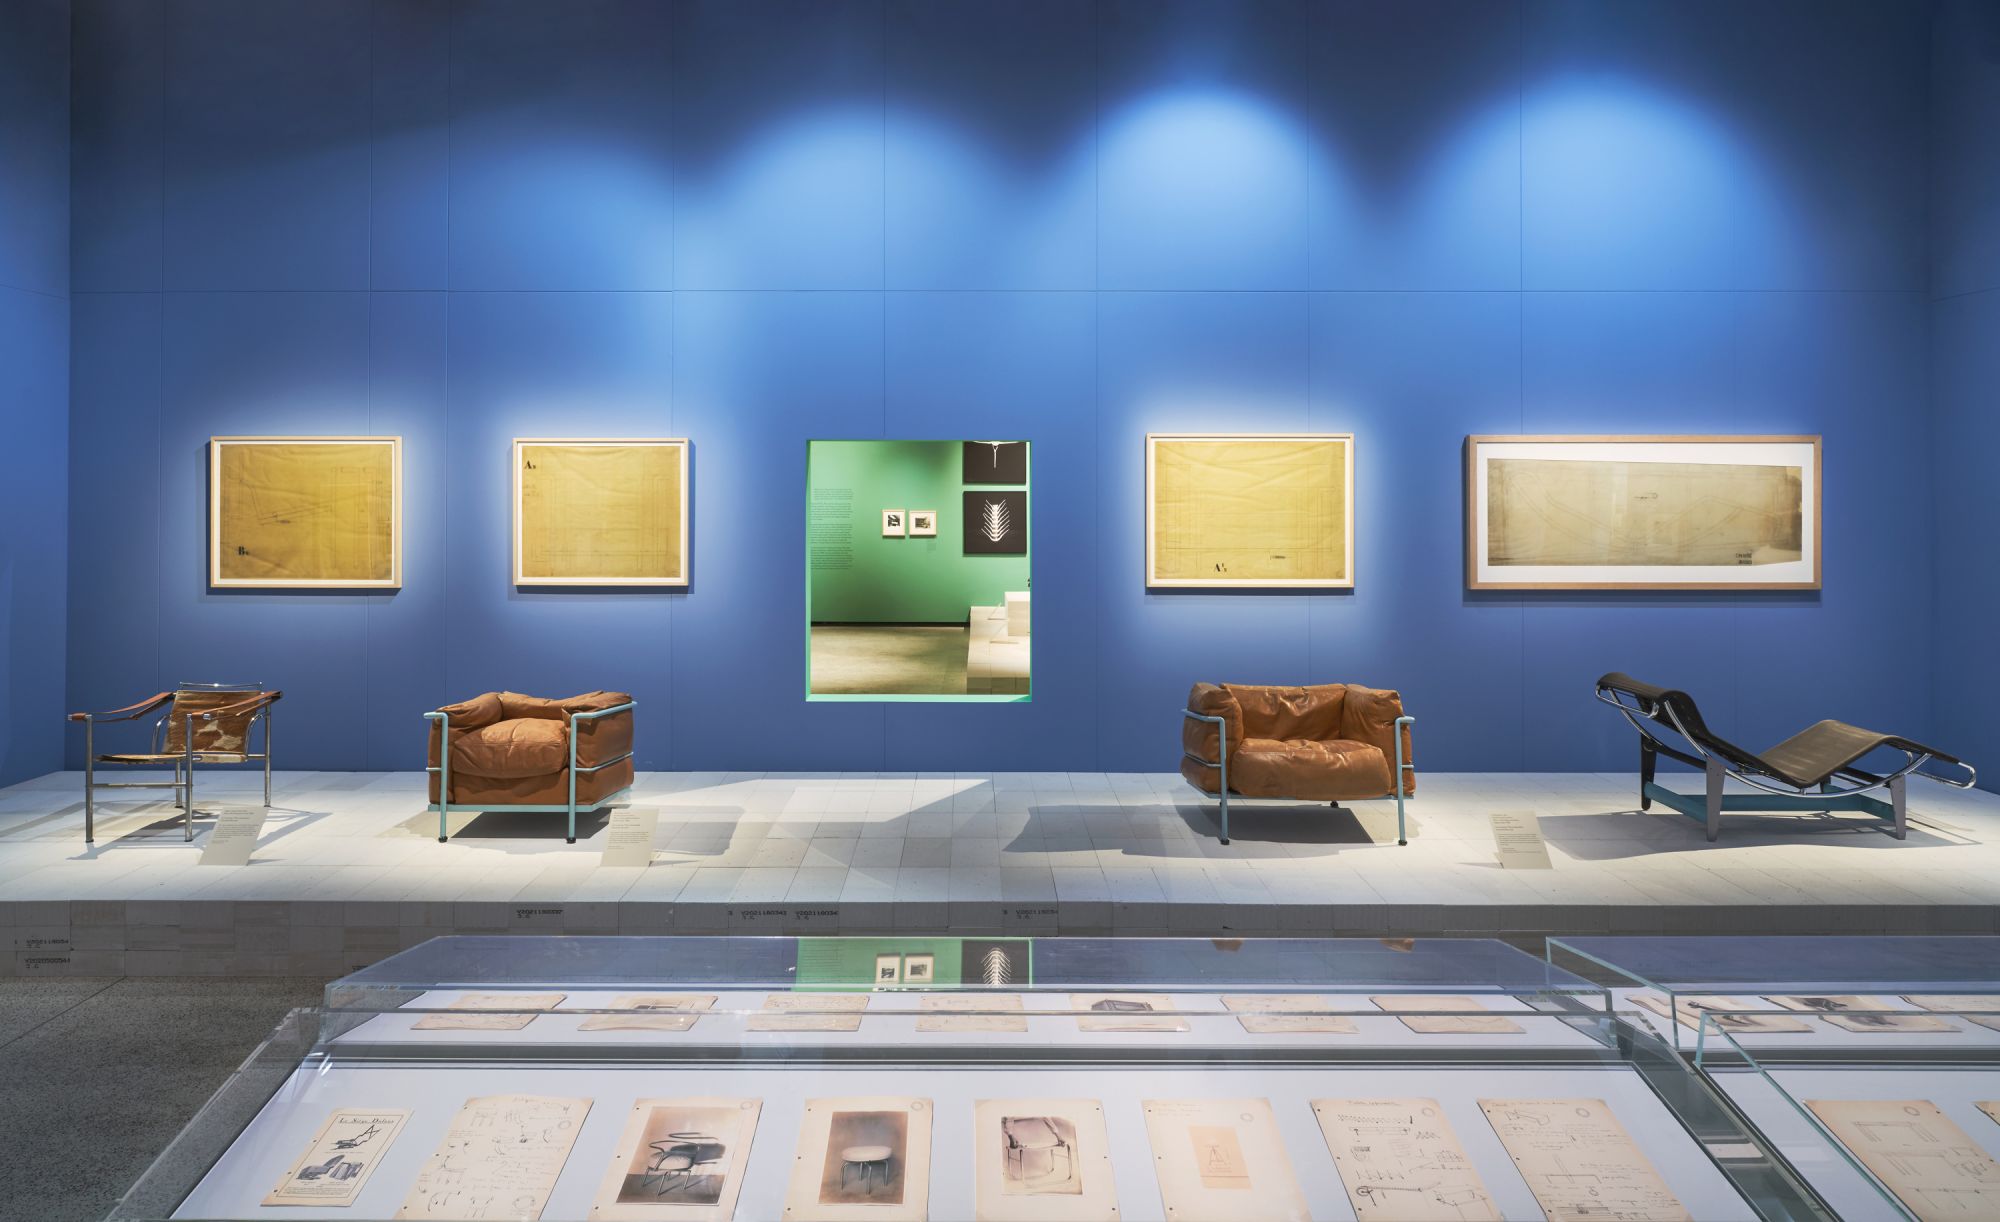 The art of living: Charlotte Perriand at Fondation Louis Vuitton